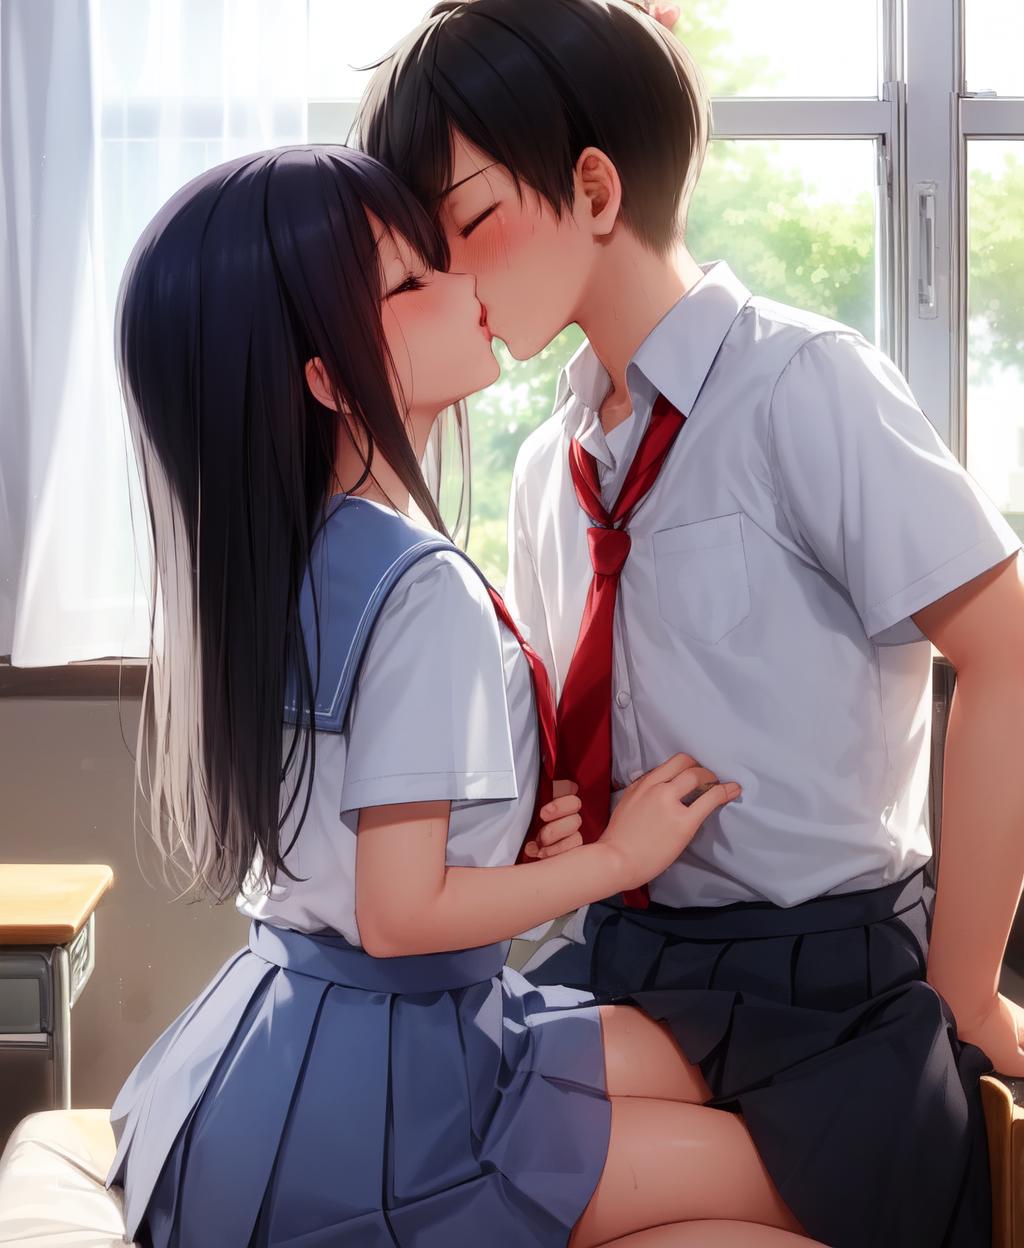 HD wallpaper: illustration of anime characters, kissing, anime girls, real  people | Wallpaper Flare